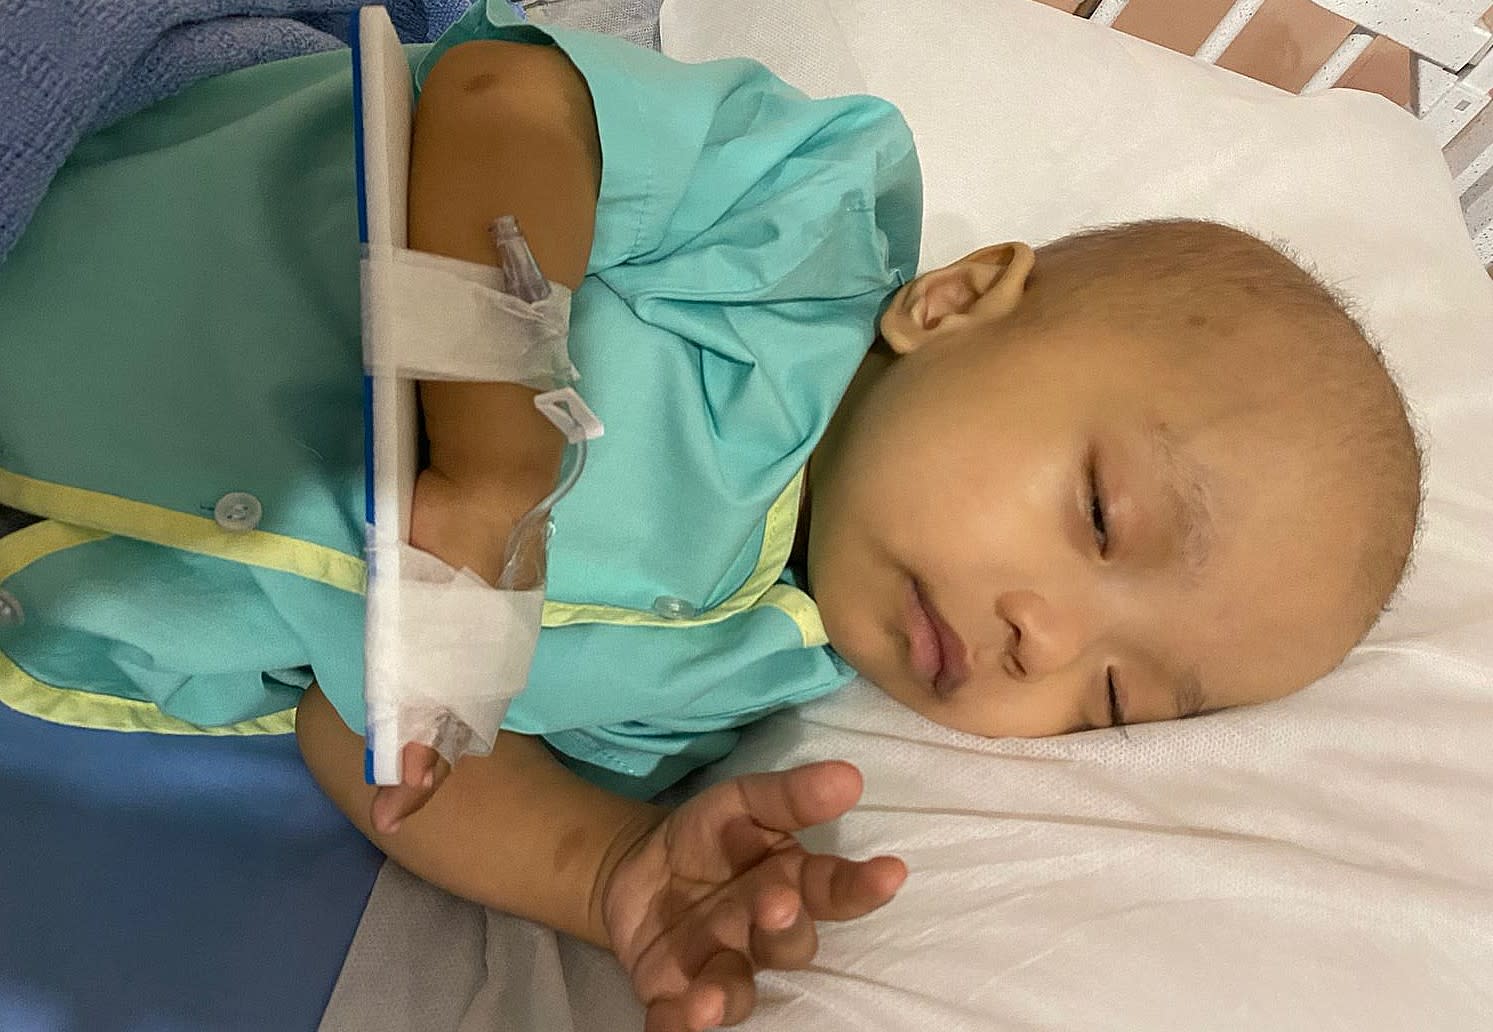 Nguyen Hai Dang at 11 months old undergoing&nbsp;interstitial brachytherapy for a cancerous tumour in his prostate in 2020.